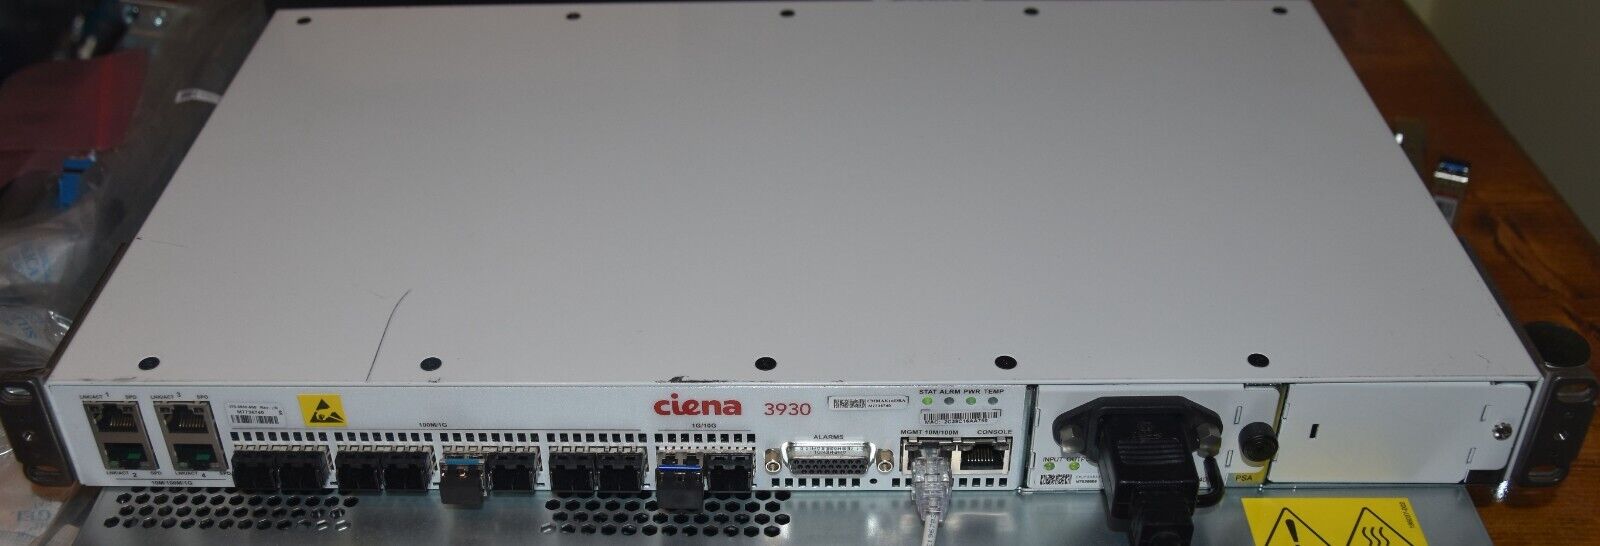 CIENA 3930 SERVICE DELIVERY SWITCH 170-3930-900 2 SFPs Ears Factory Reset TESTED